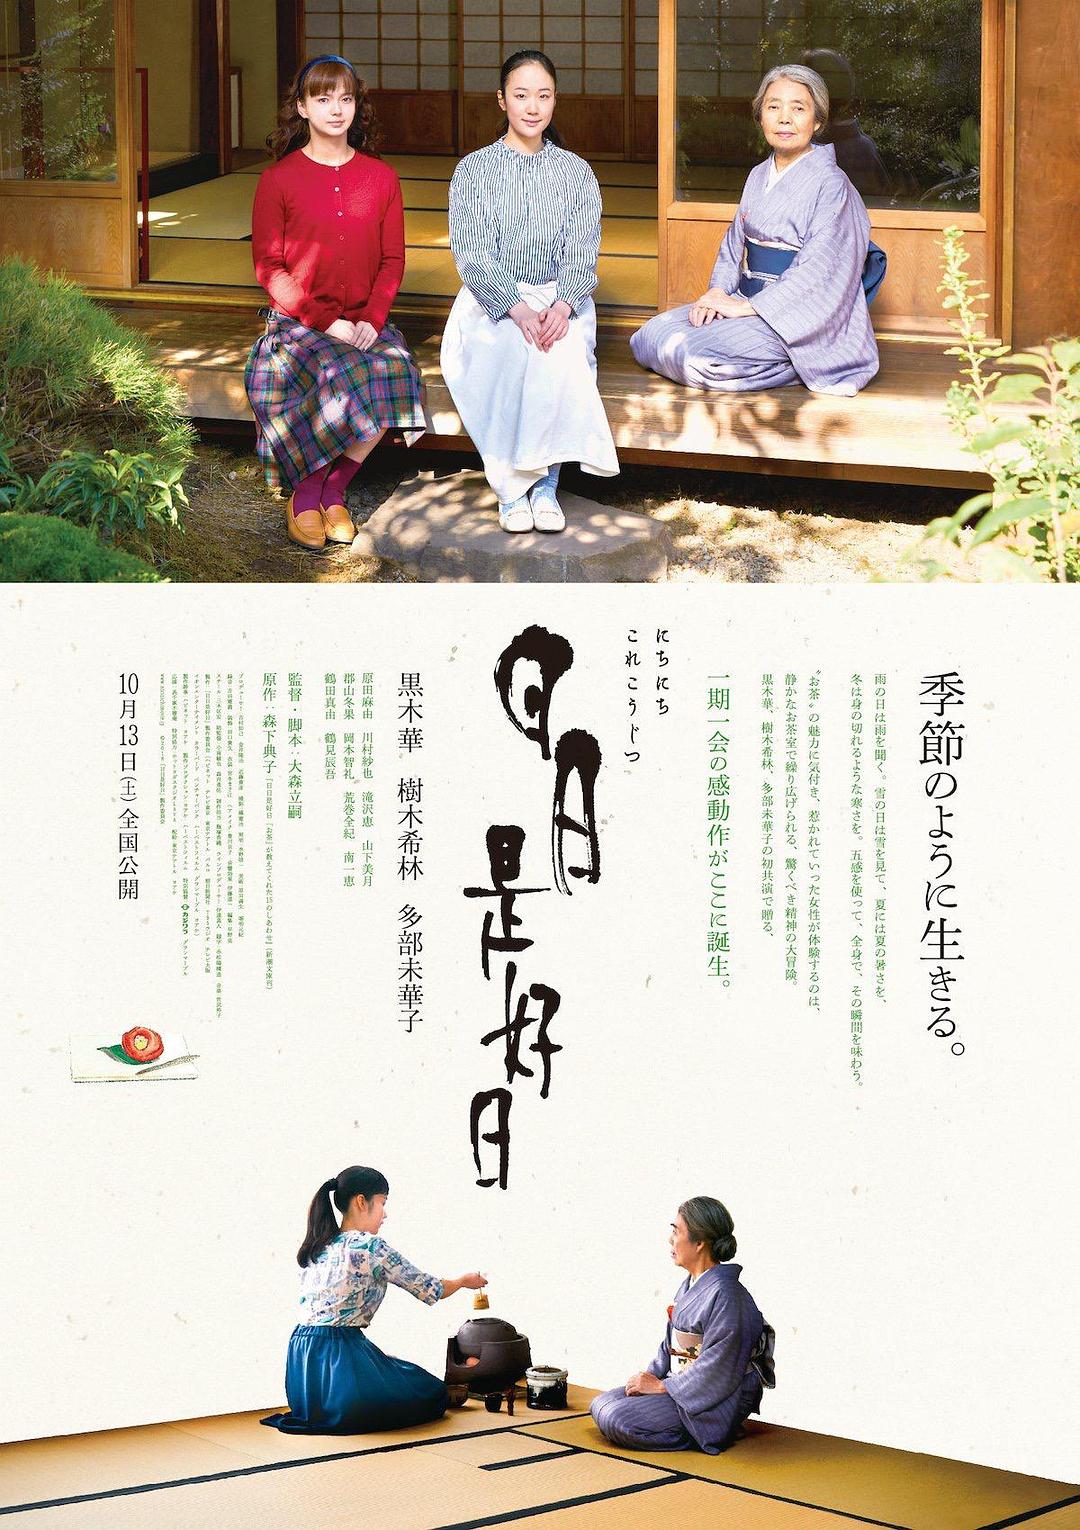 Every Day a Good Day/天天是个好日子 Every.Day.A.Good.Day.2018.JAPANESE.1080p.BluRay.x264.DTS-iKiW 8.99GB-1.png